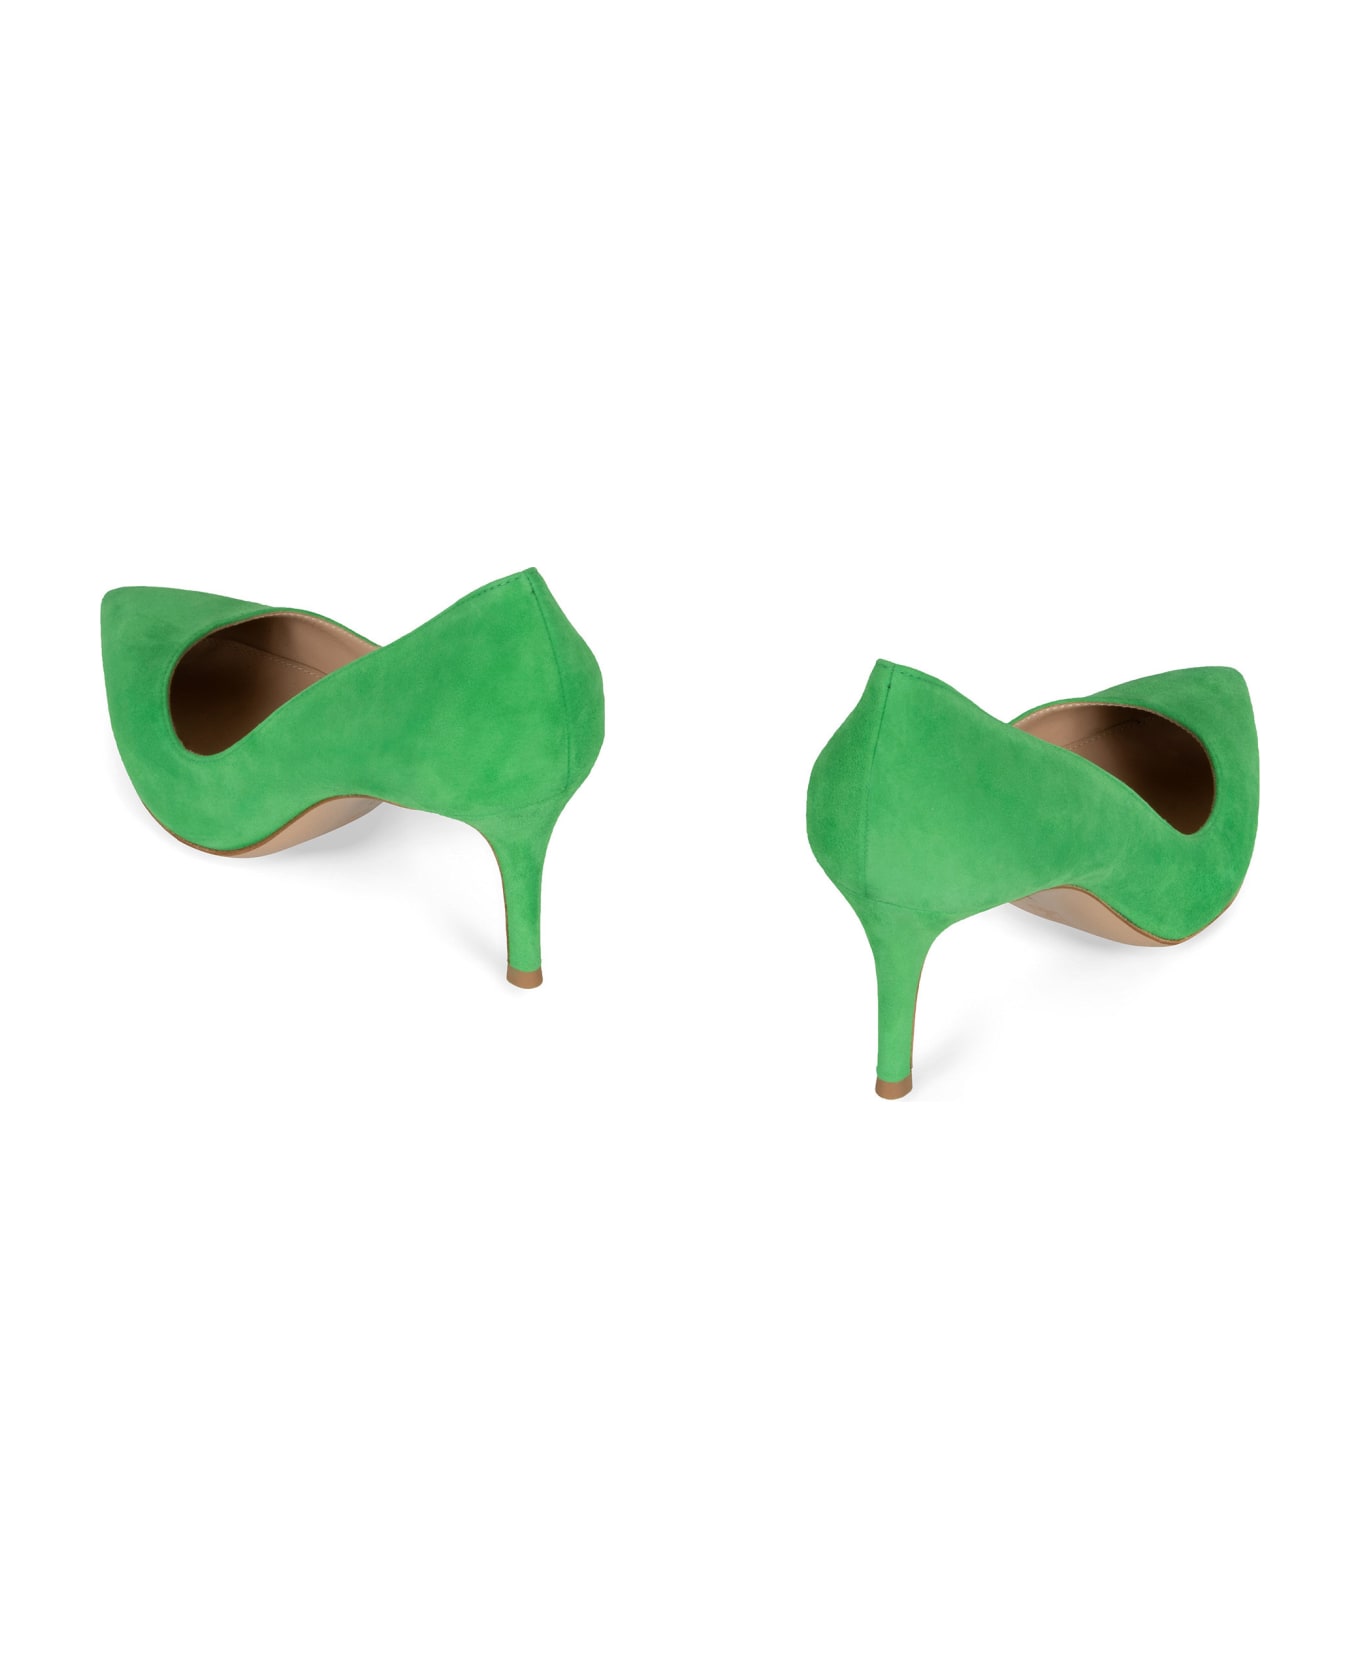 Gianvito Rossi Suede Pumps - green ハイヒール